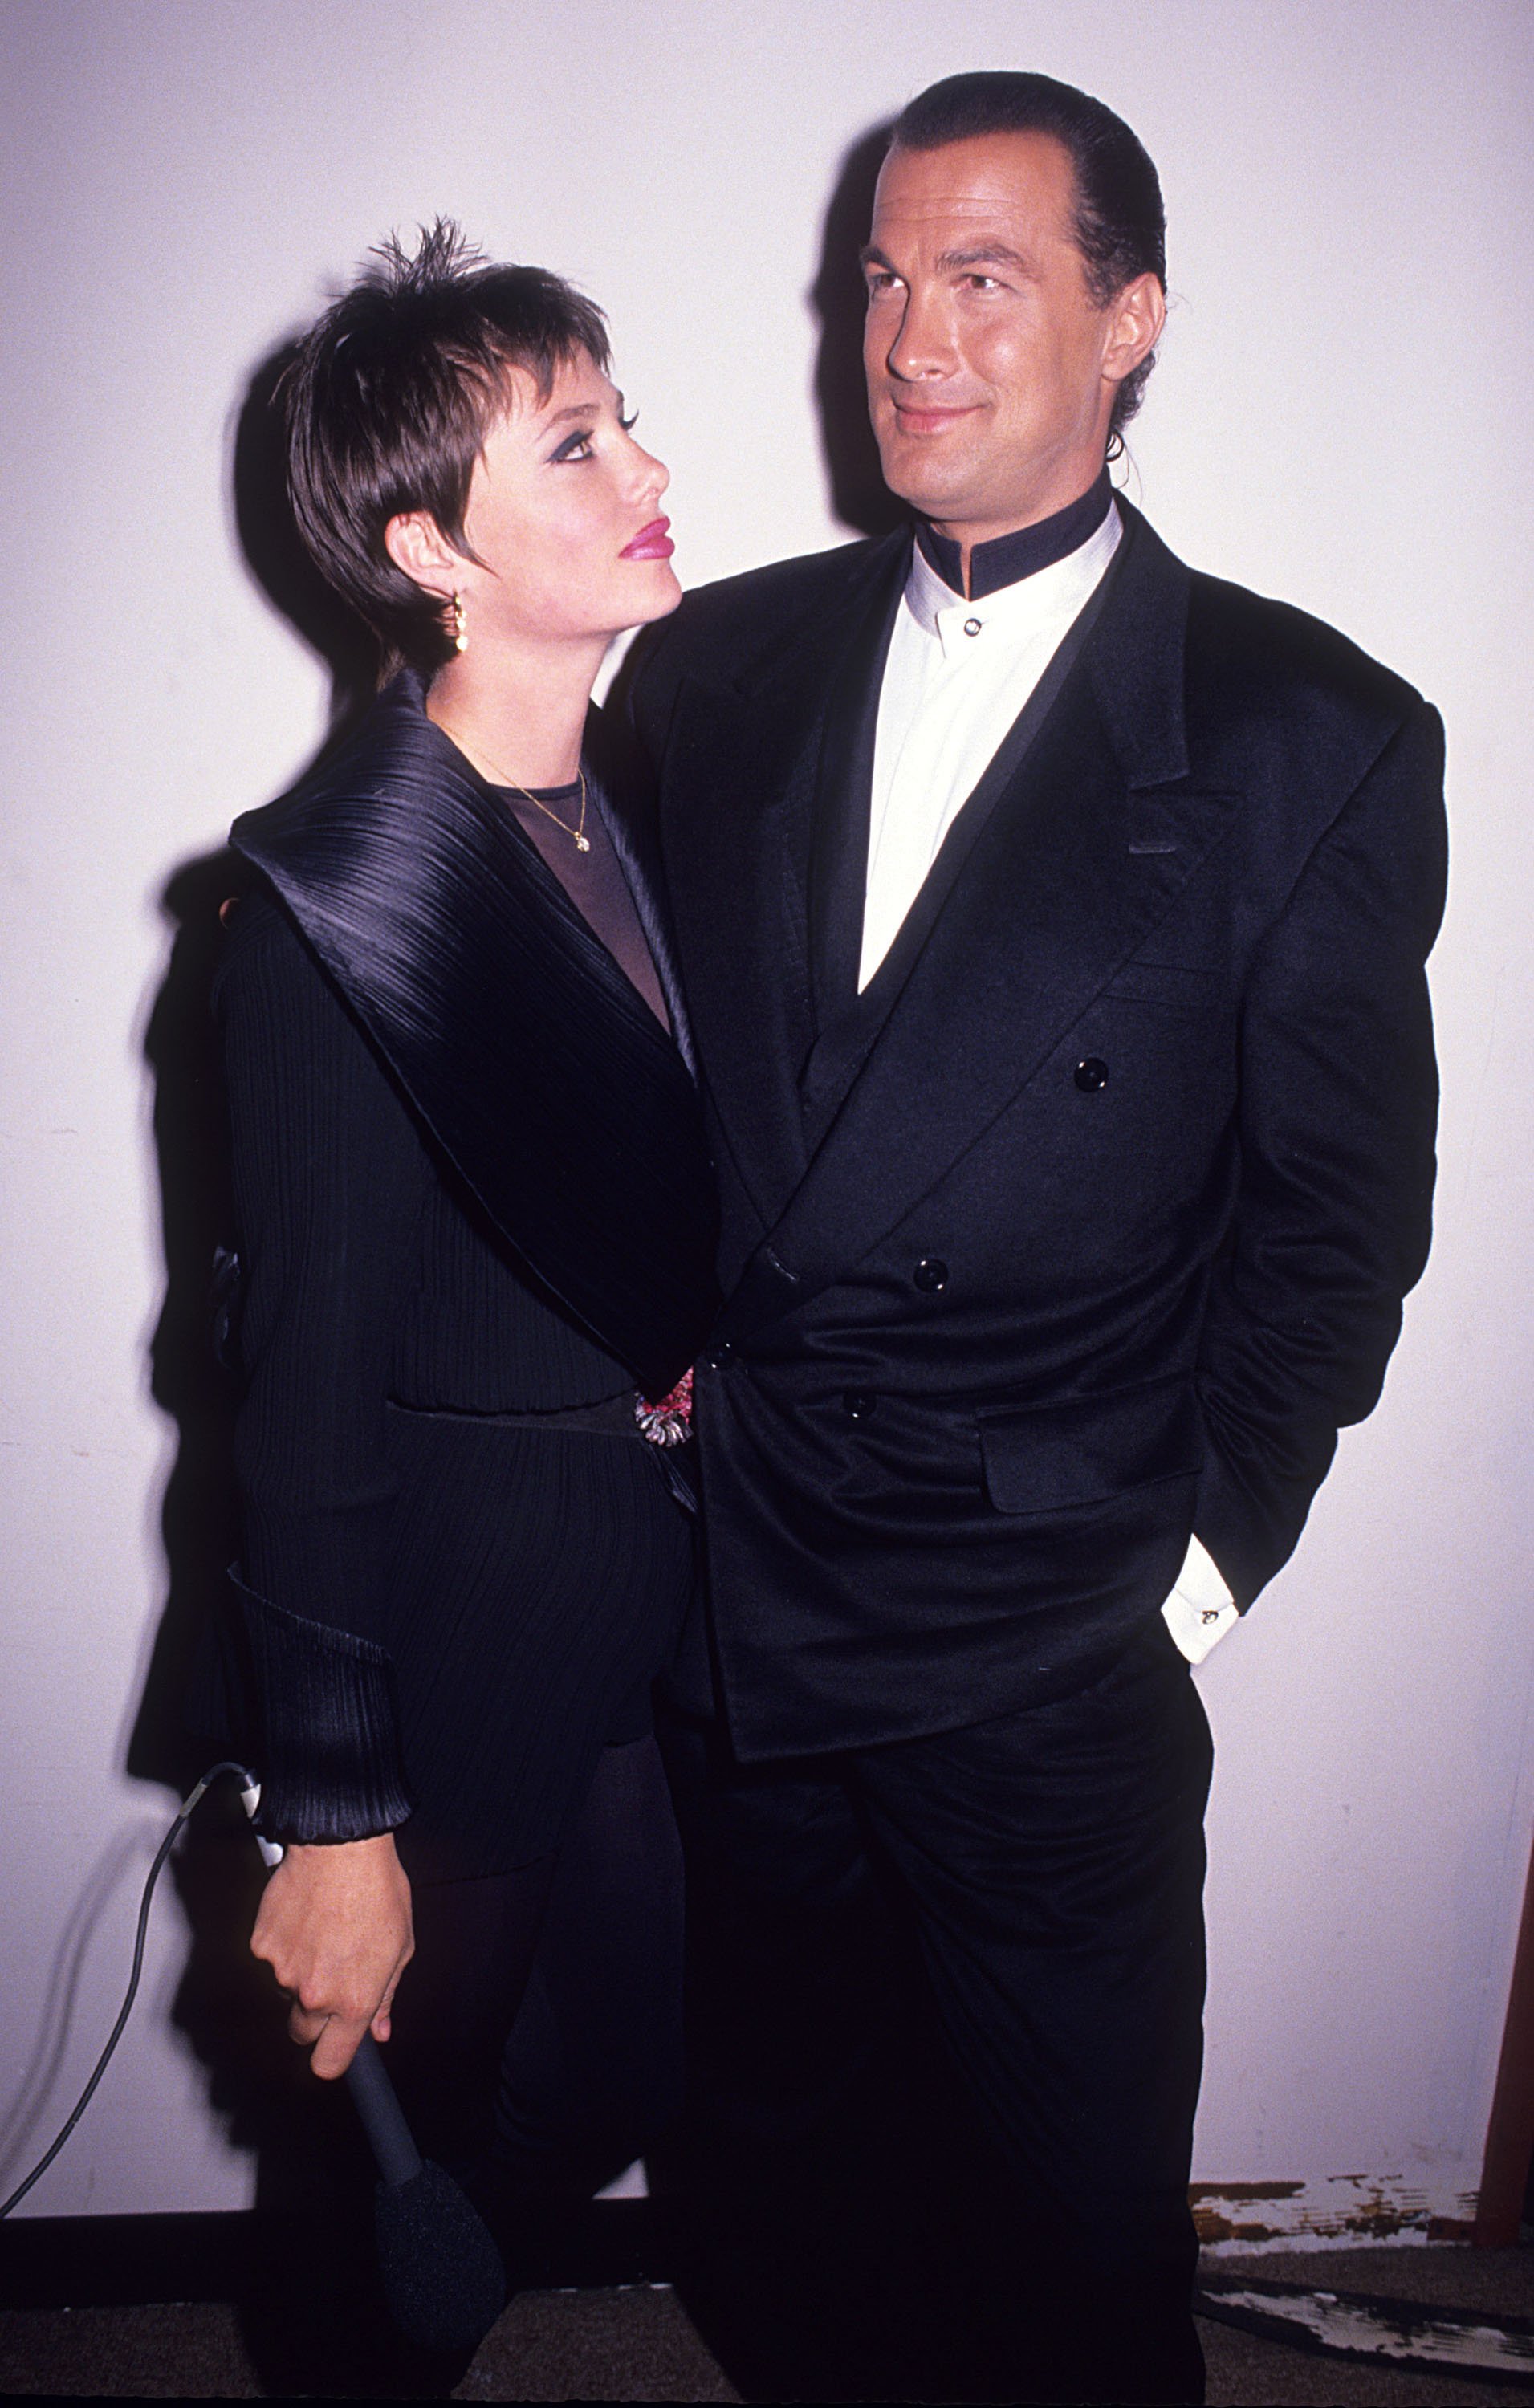 Steven Seagal and Kelly LeBrock at the film premiere of "Out for Justice" on April 14, 1991. / Source: Getty Images